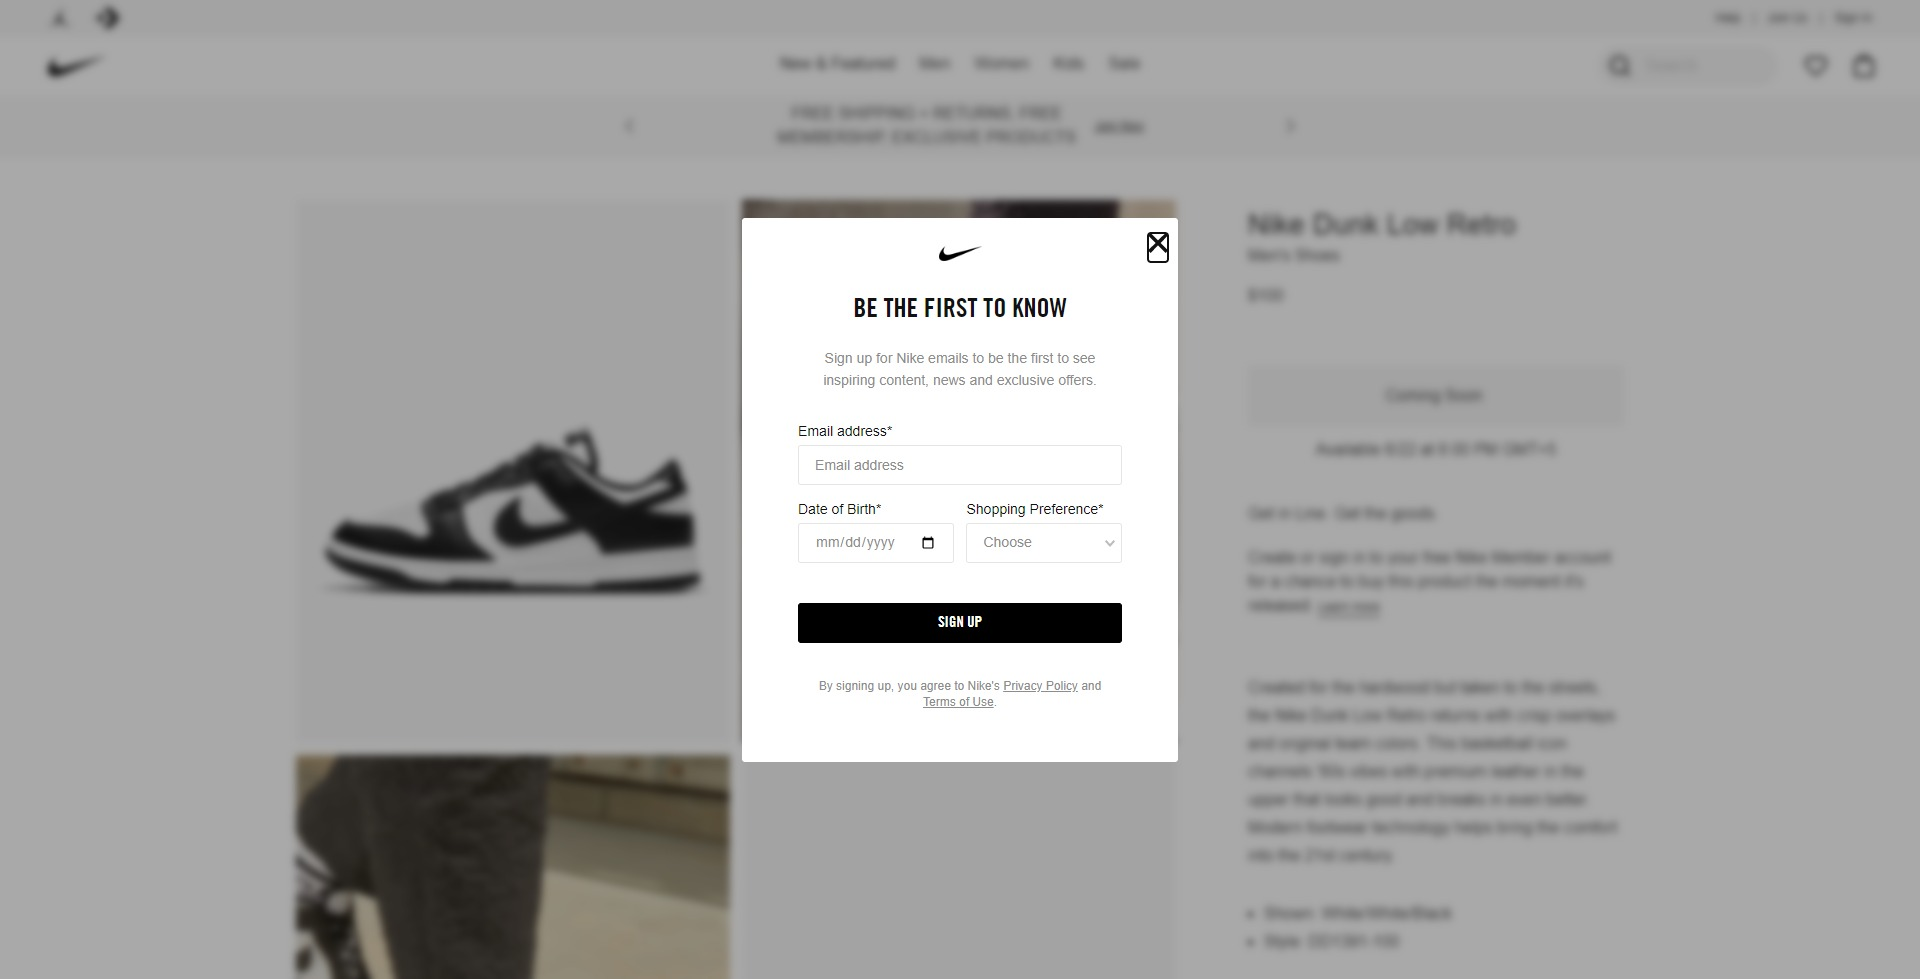 How To Improve Your eCommerce Website Sales in 16 Easy Steps